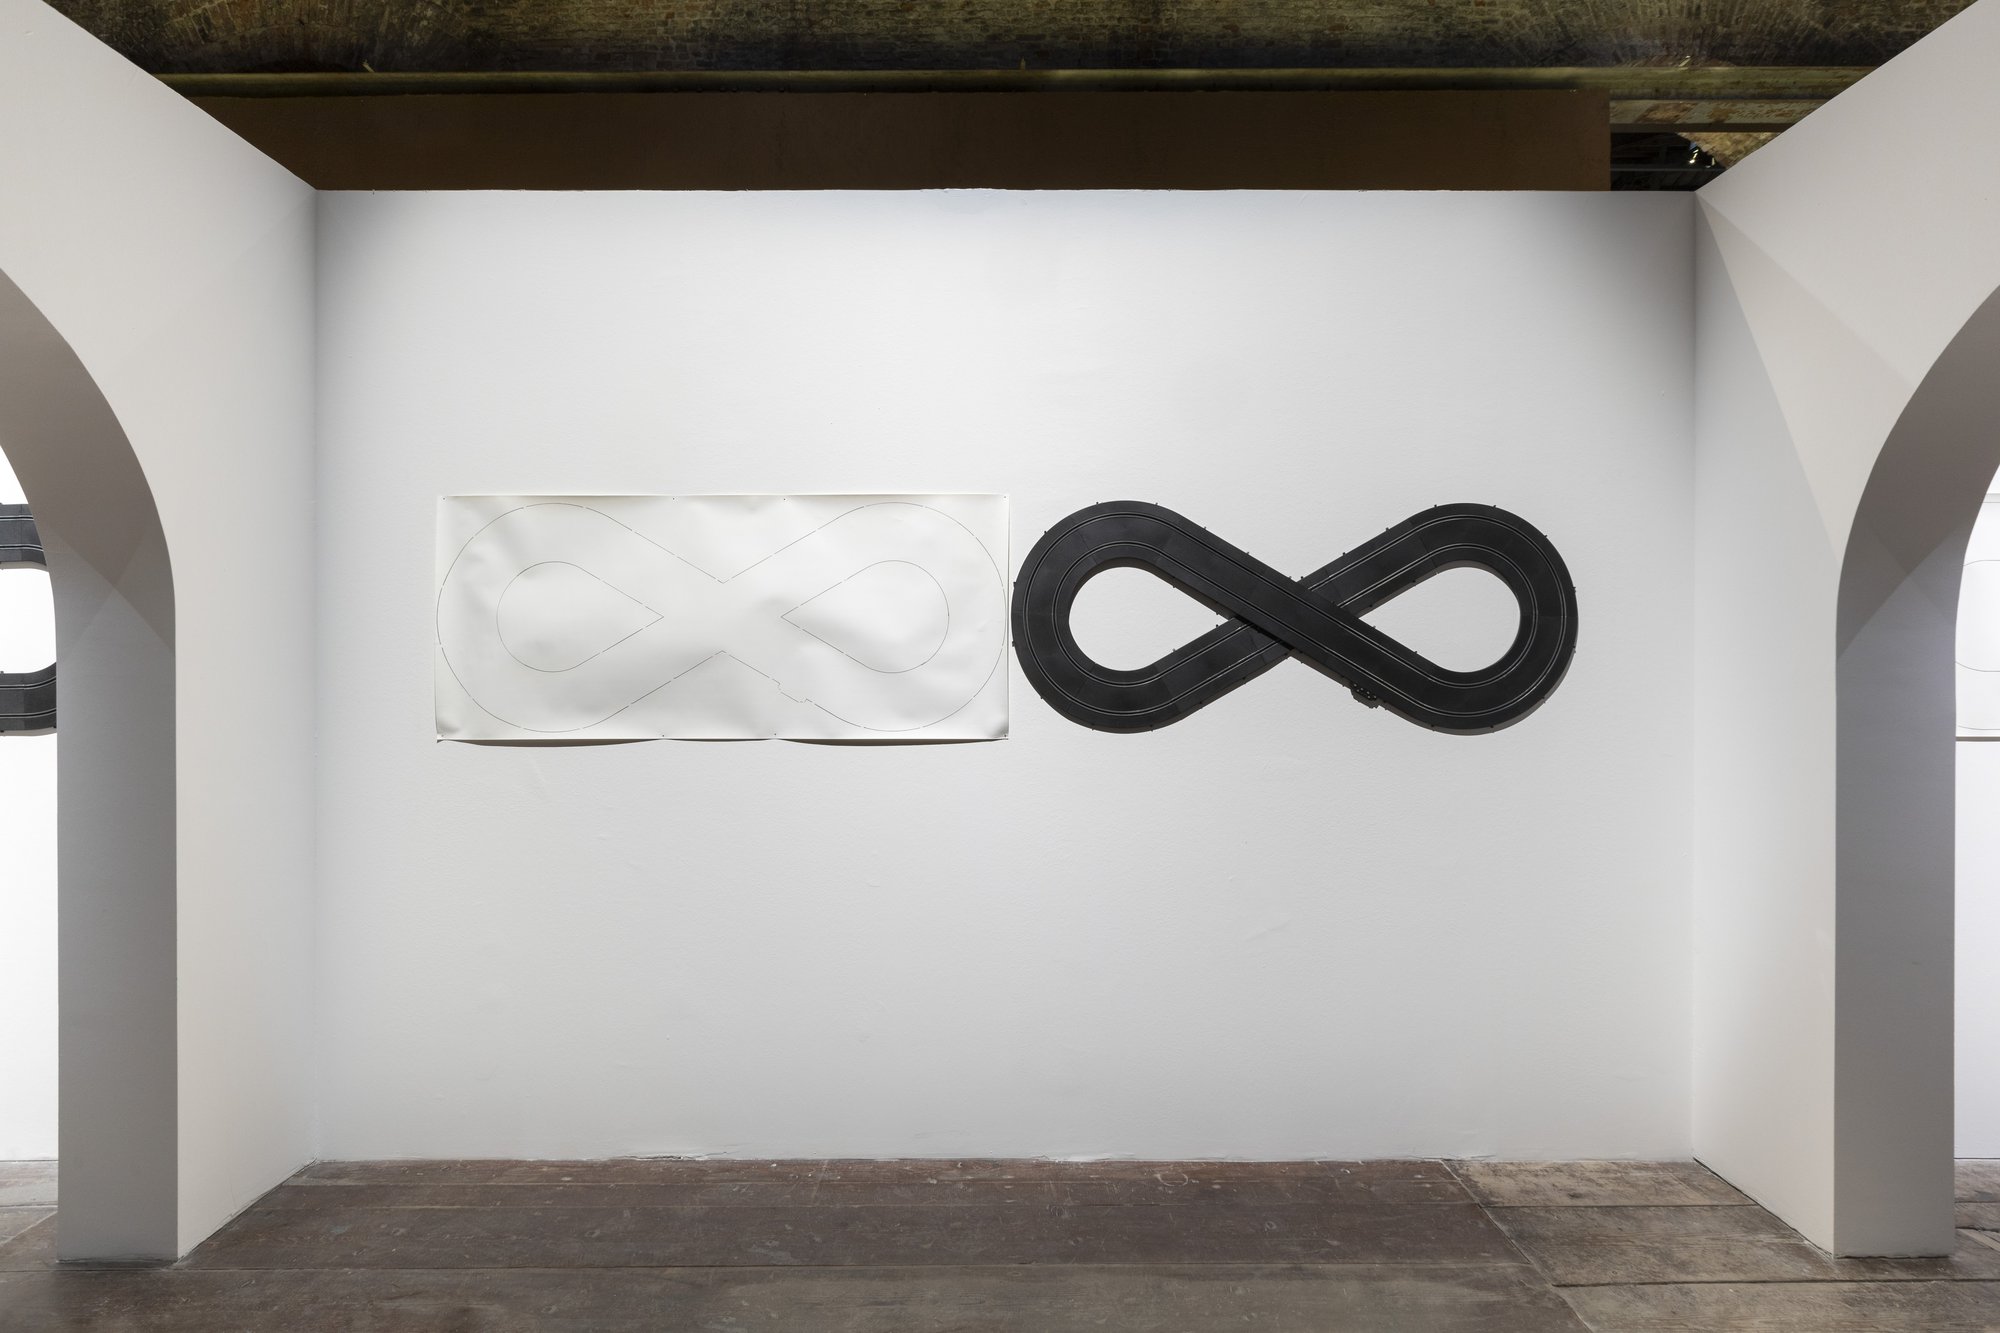 Liliana Moro, Salti, toy car tracks (plastic and steel), drawings on paper, dimensions variable, 1997. Installation view, May You Live in Interesting Times, Italian Pavilion at 58th Venice Biennale, Venice, 2019